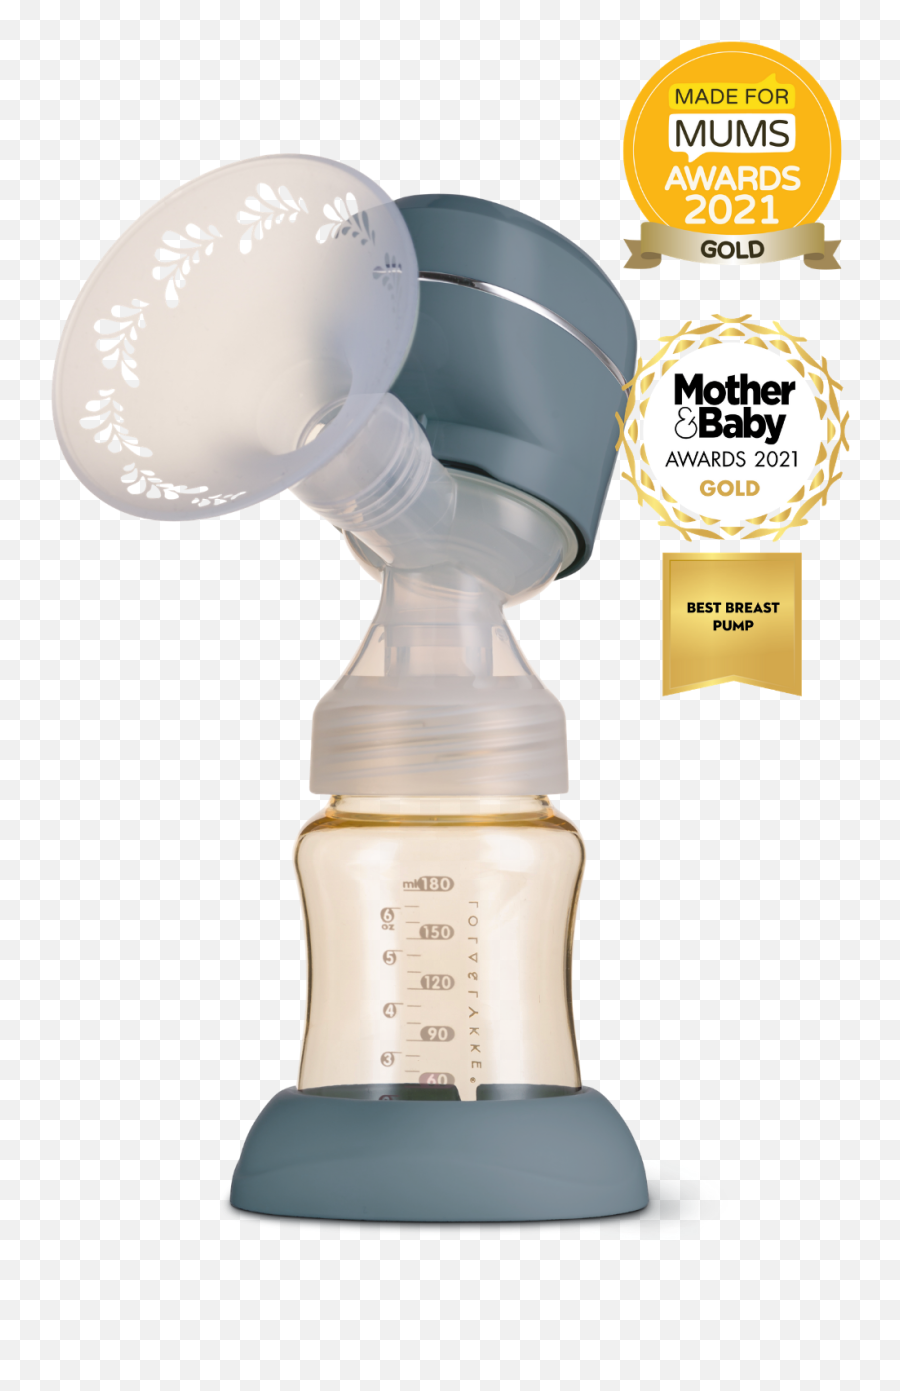 Smart Electric Breast Pump No Tubes No Wires Lolau0026lykke Emoji,23 Emotions You Can't Describe